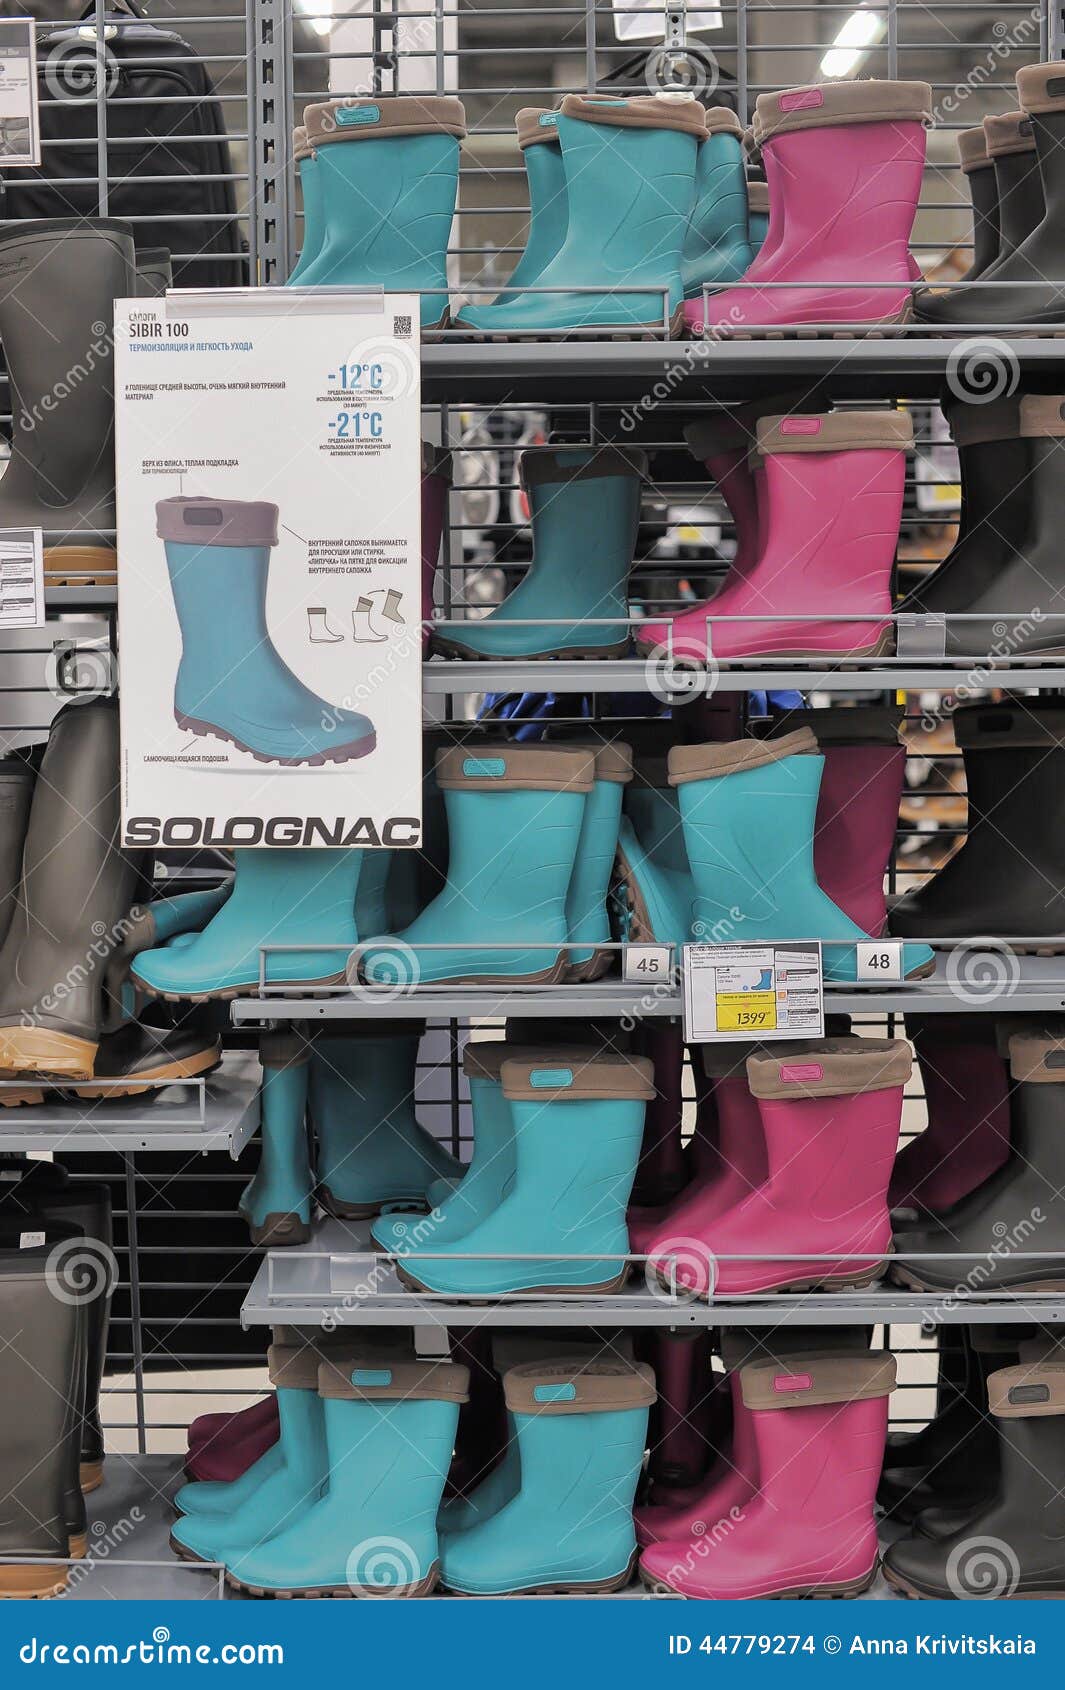 Where Can I Find Rain Boots In Store - Yu Boots